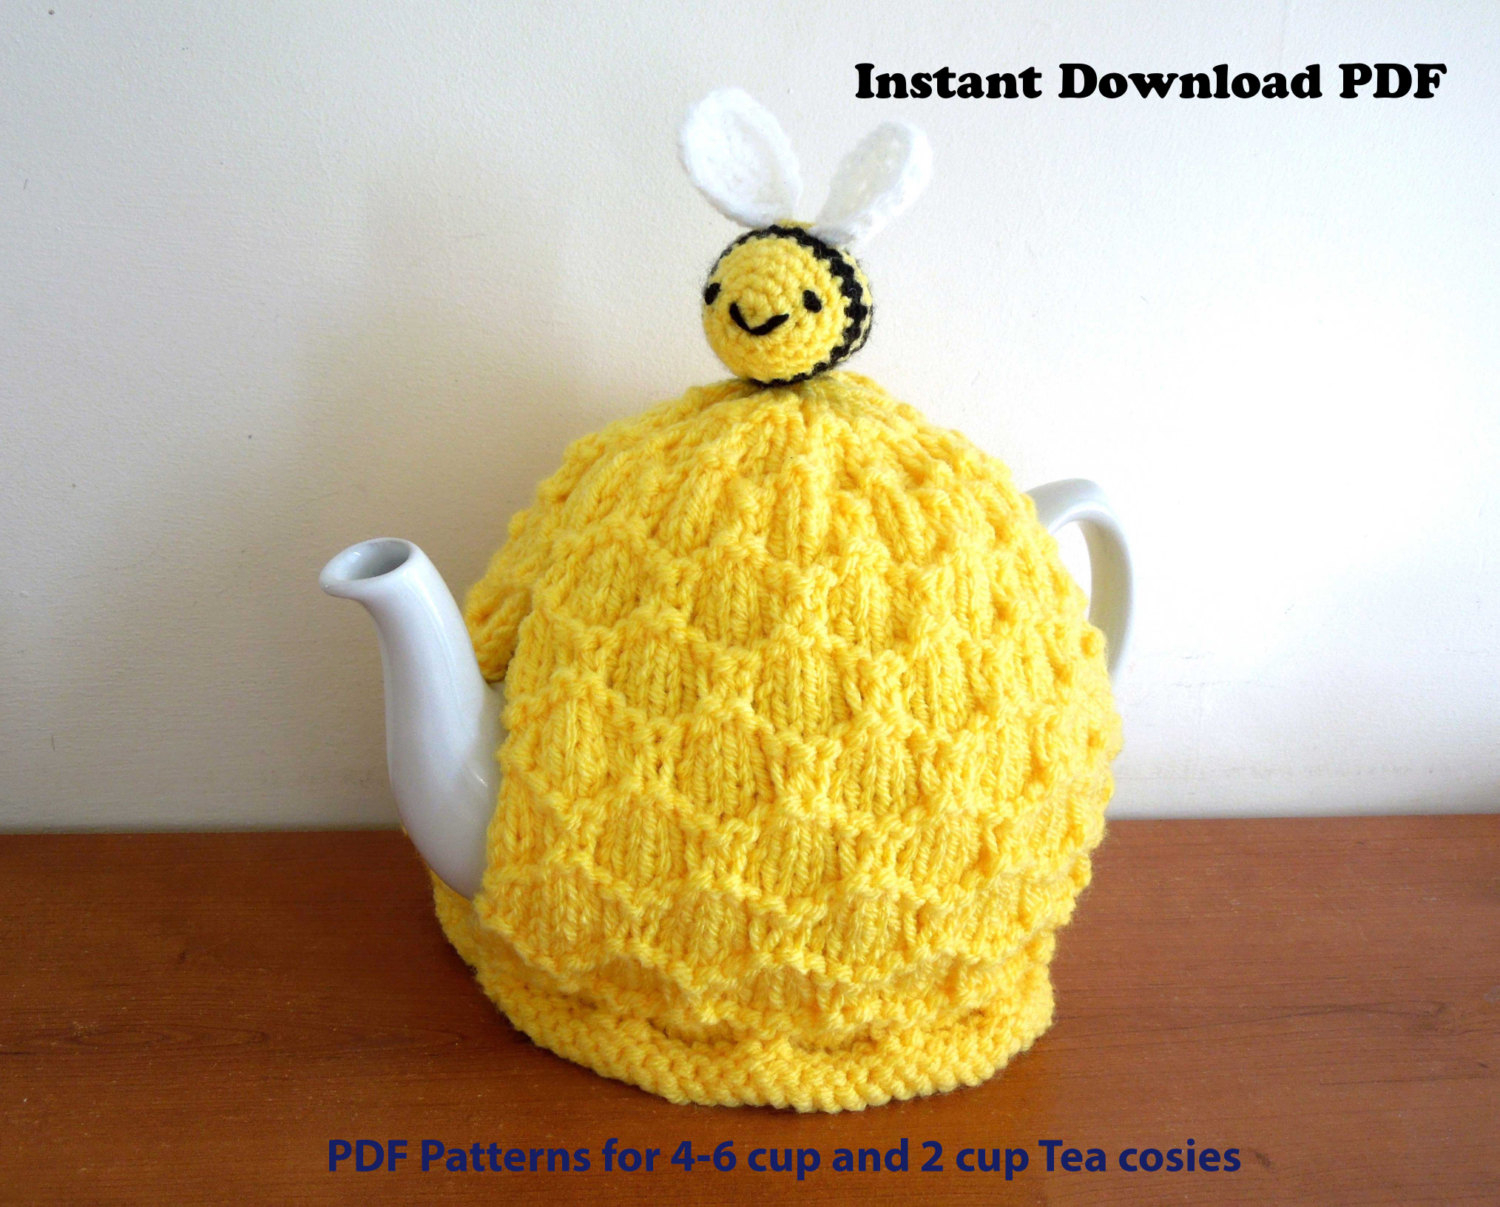 Patterns For Knitted Tea Cosies Beehive Tea Cosy Knitting Digital Pattern Only For 4 6 Cup 2 Pt 40 Fl Oz Standard Teapot And Small 2 Cup 450ml Teapot Bee Pattern